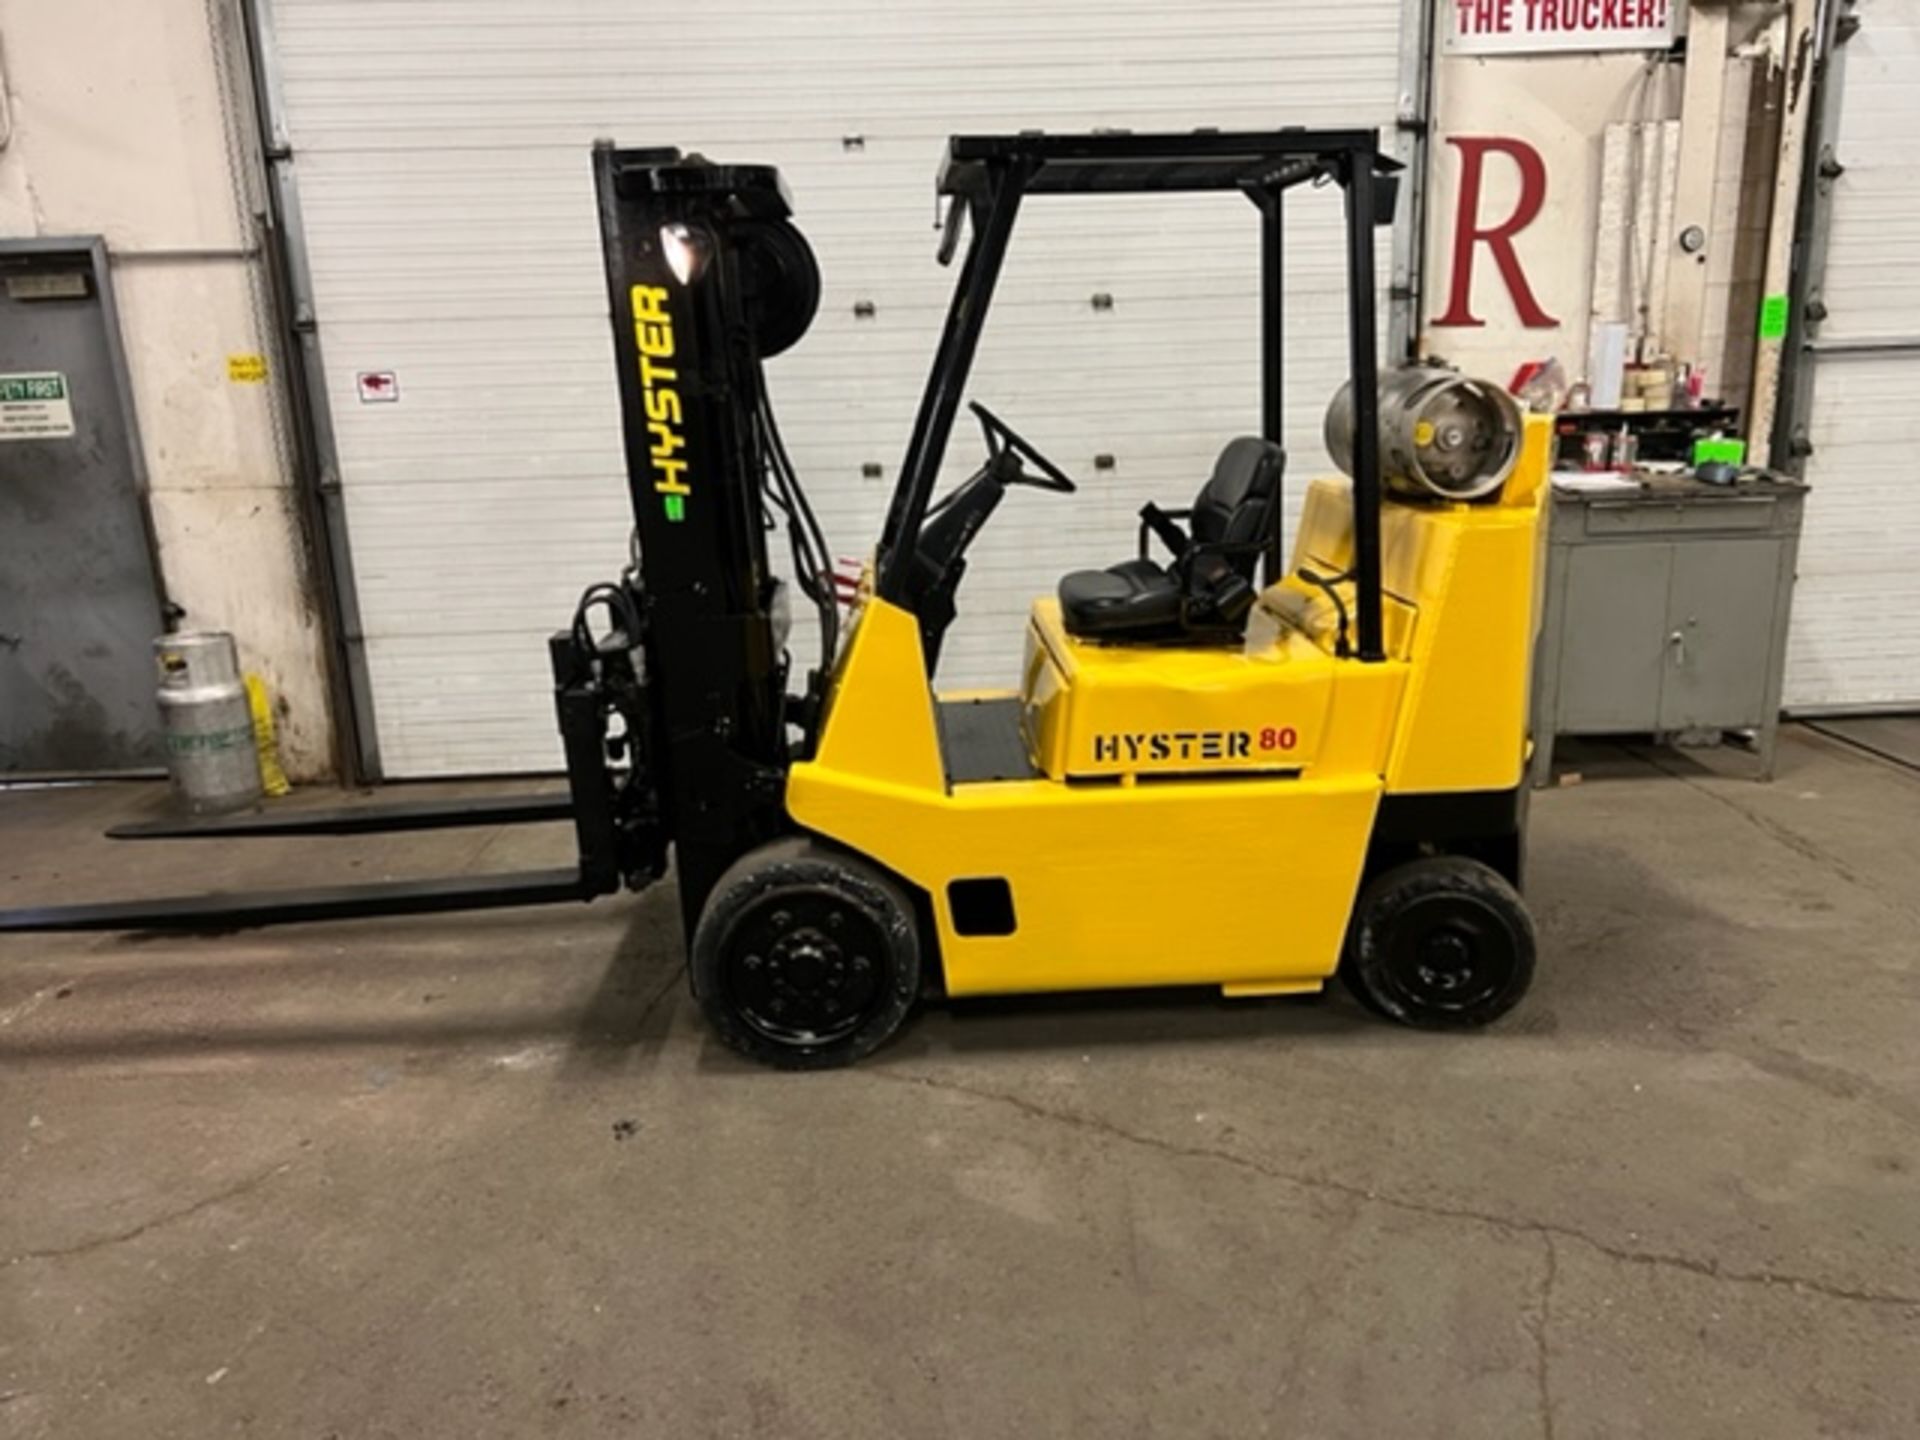 FREE CUSTOMS - NICE Hyster model 80 - 8,000lbs Capacity Forklift LPG (propane) with 60" forks with